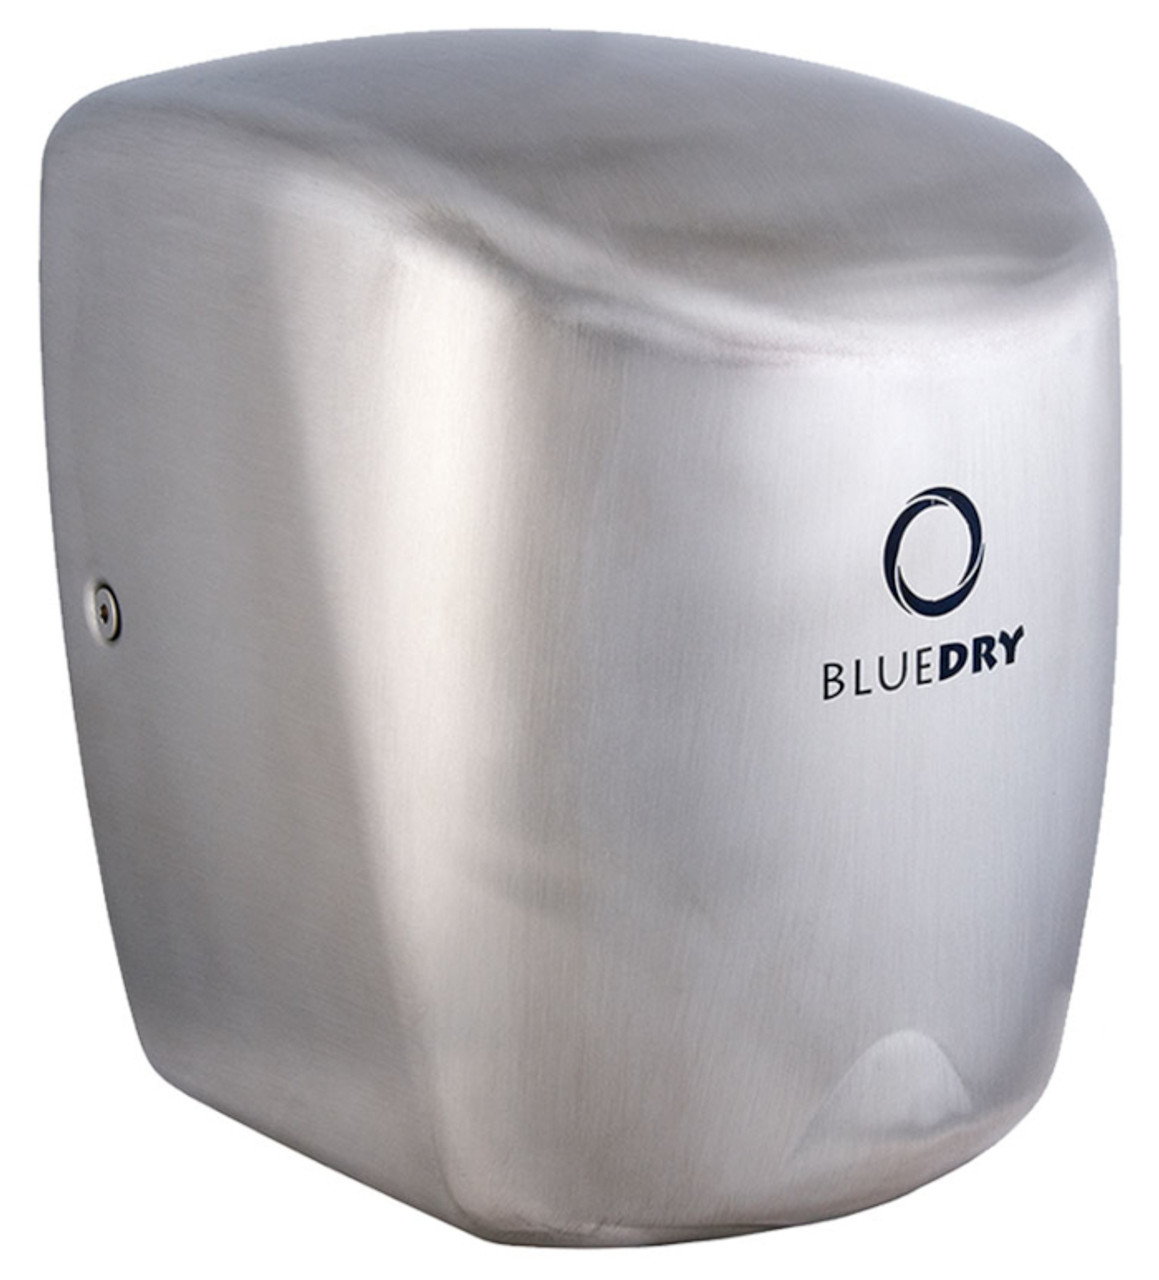 HD-BD1015BS - BlueDry Mini Jet Hand Dryer - Brushed Stainless Steel